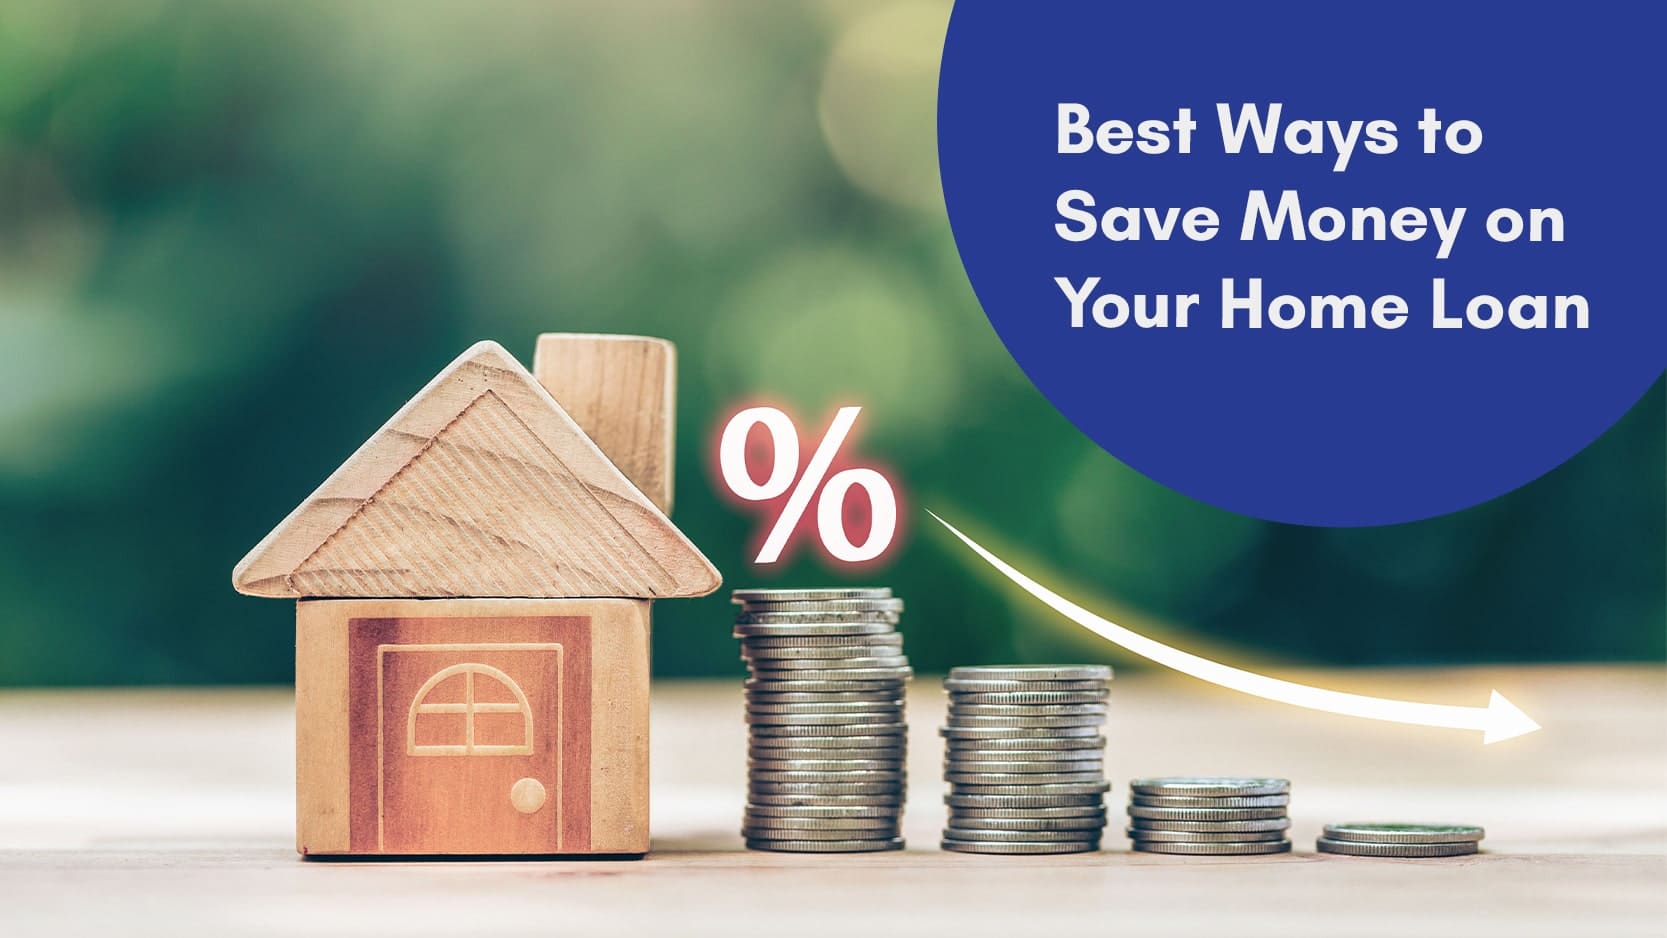 Best Ways to Save Money on Your Home Loan